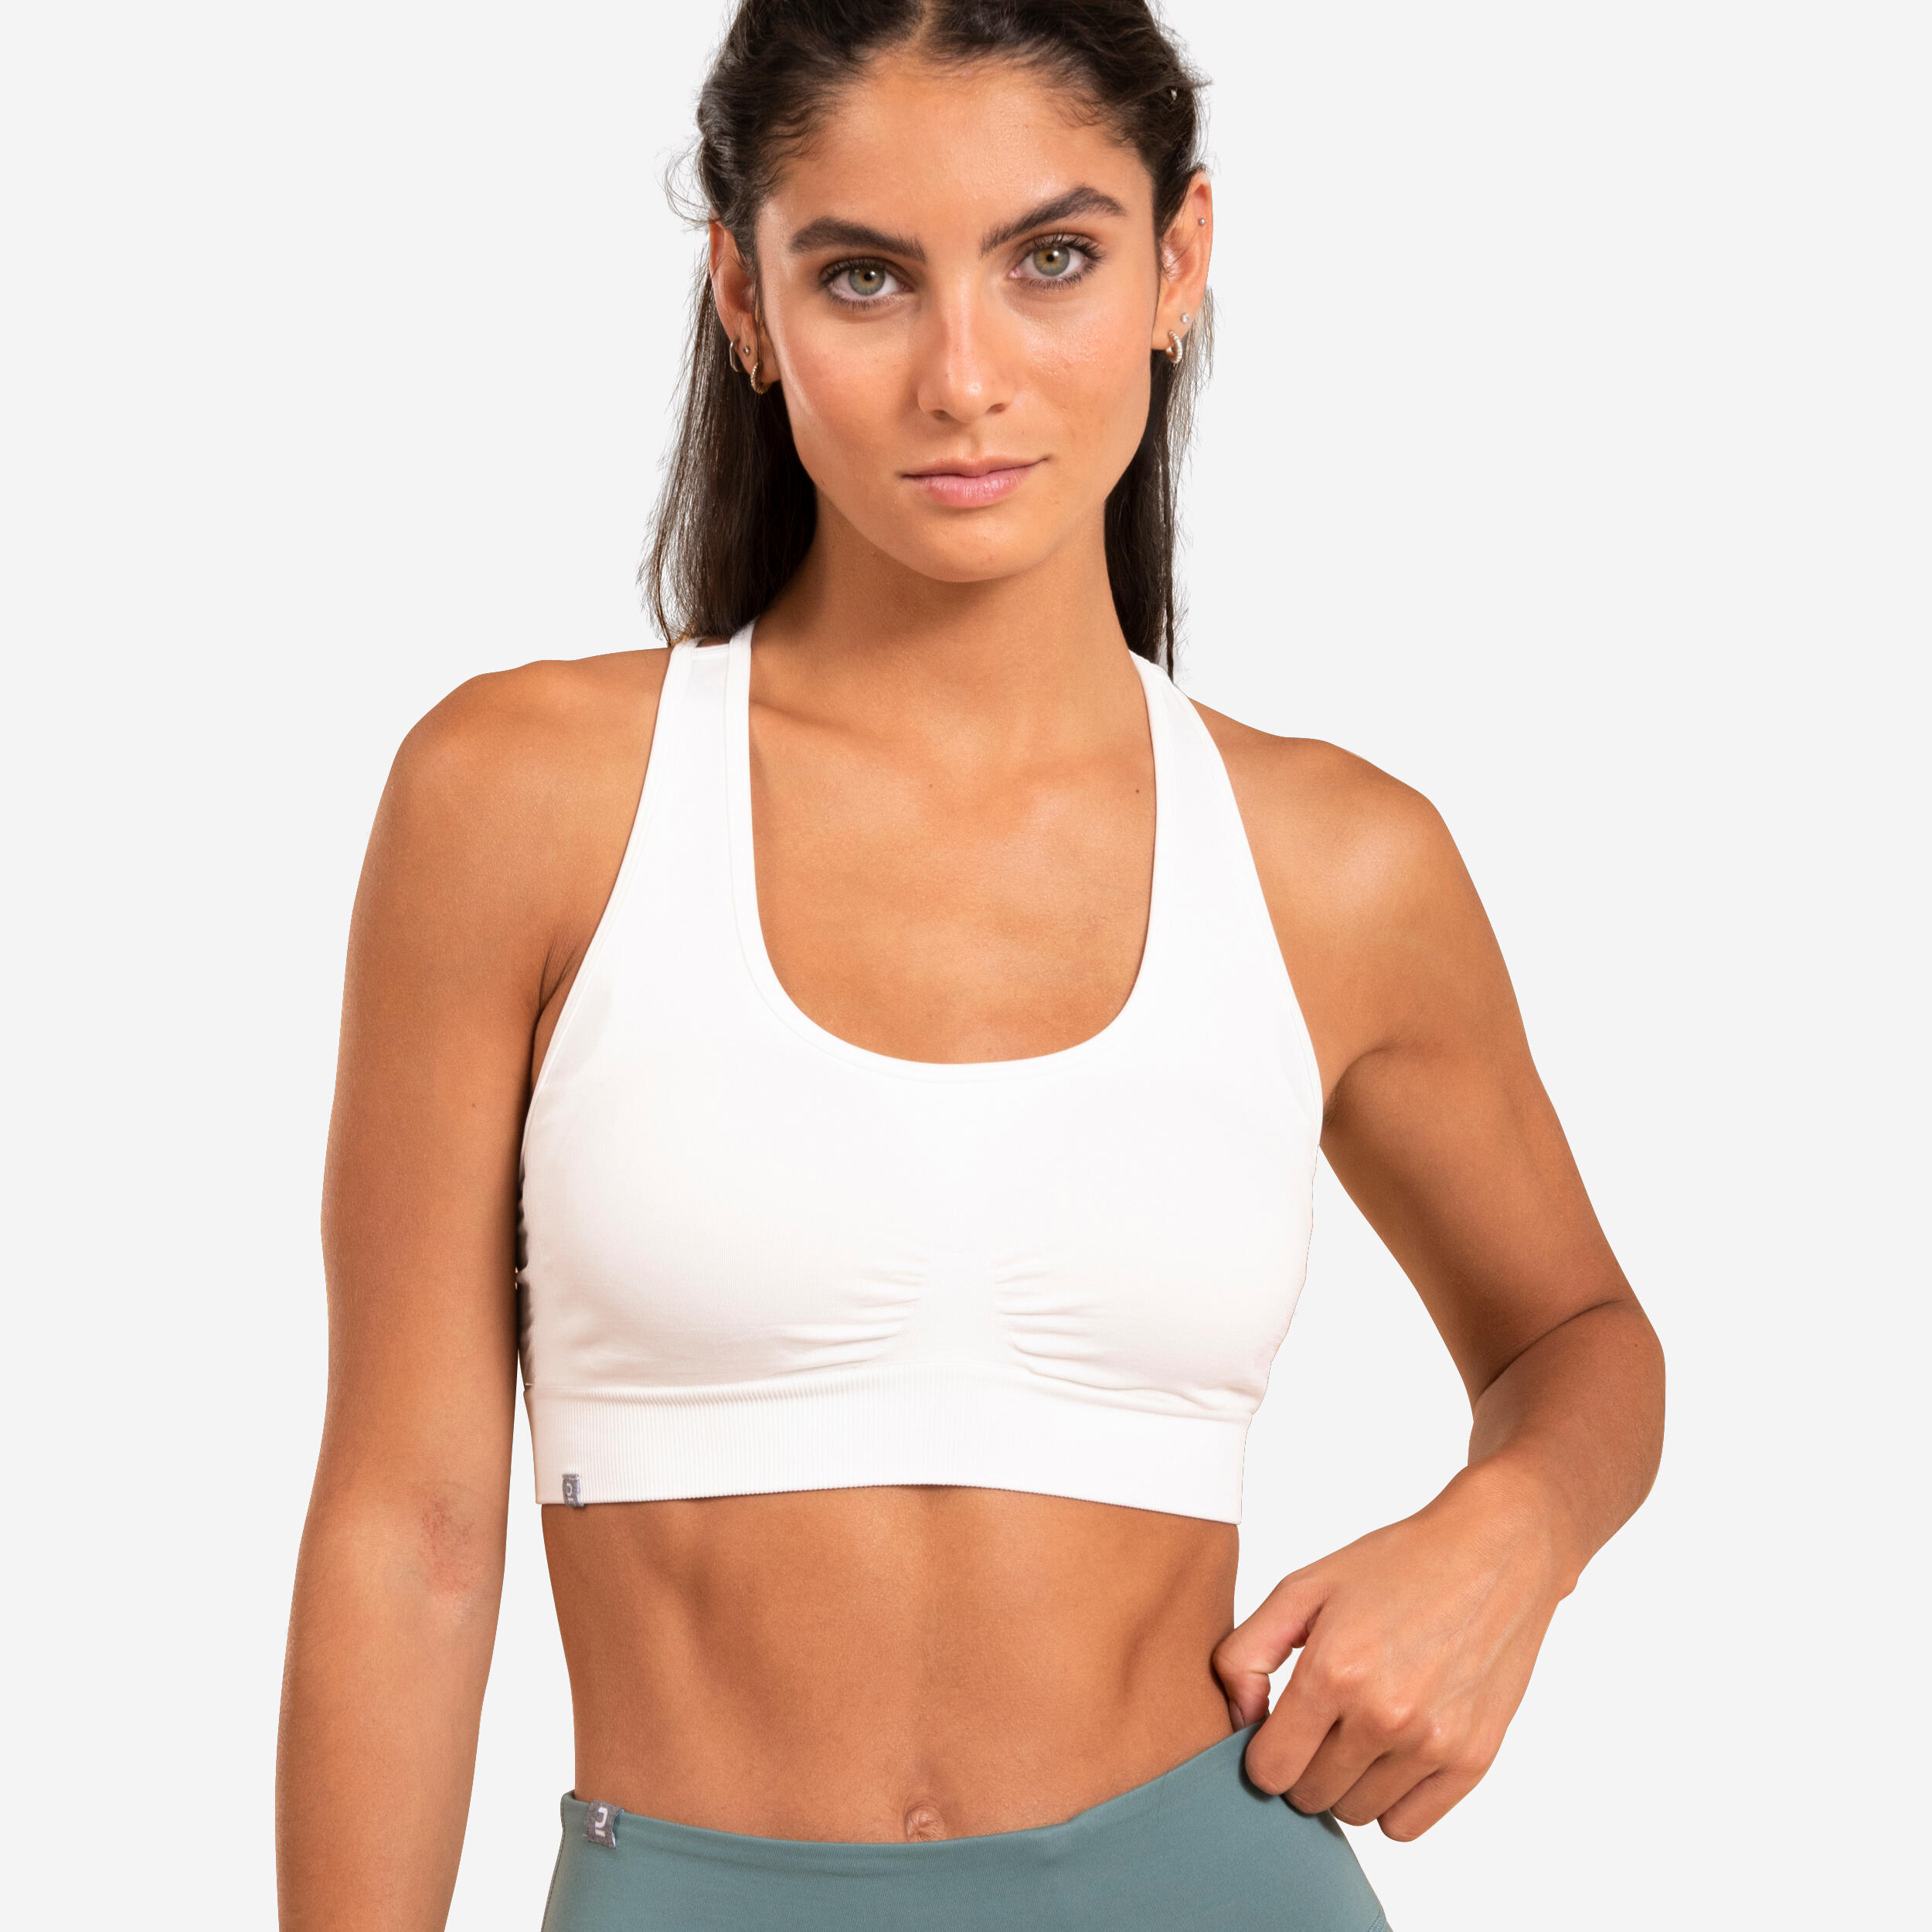 740 Athletic style ideas  workout clothes, fitness fashion, athletic  outfits